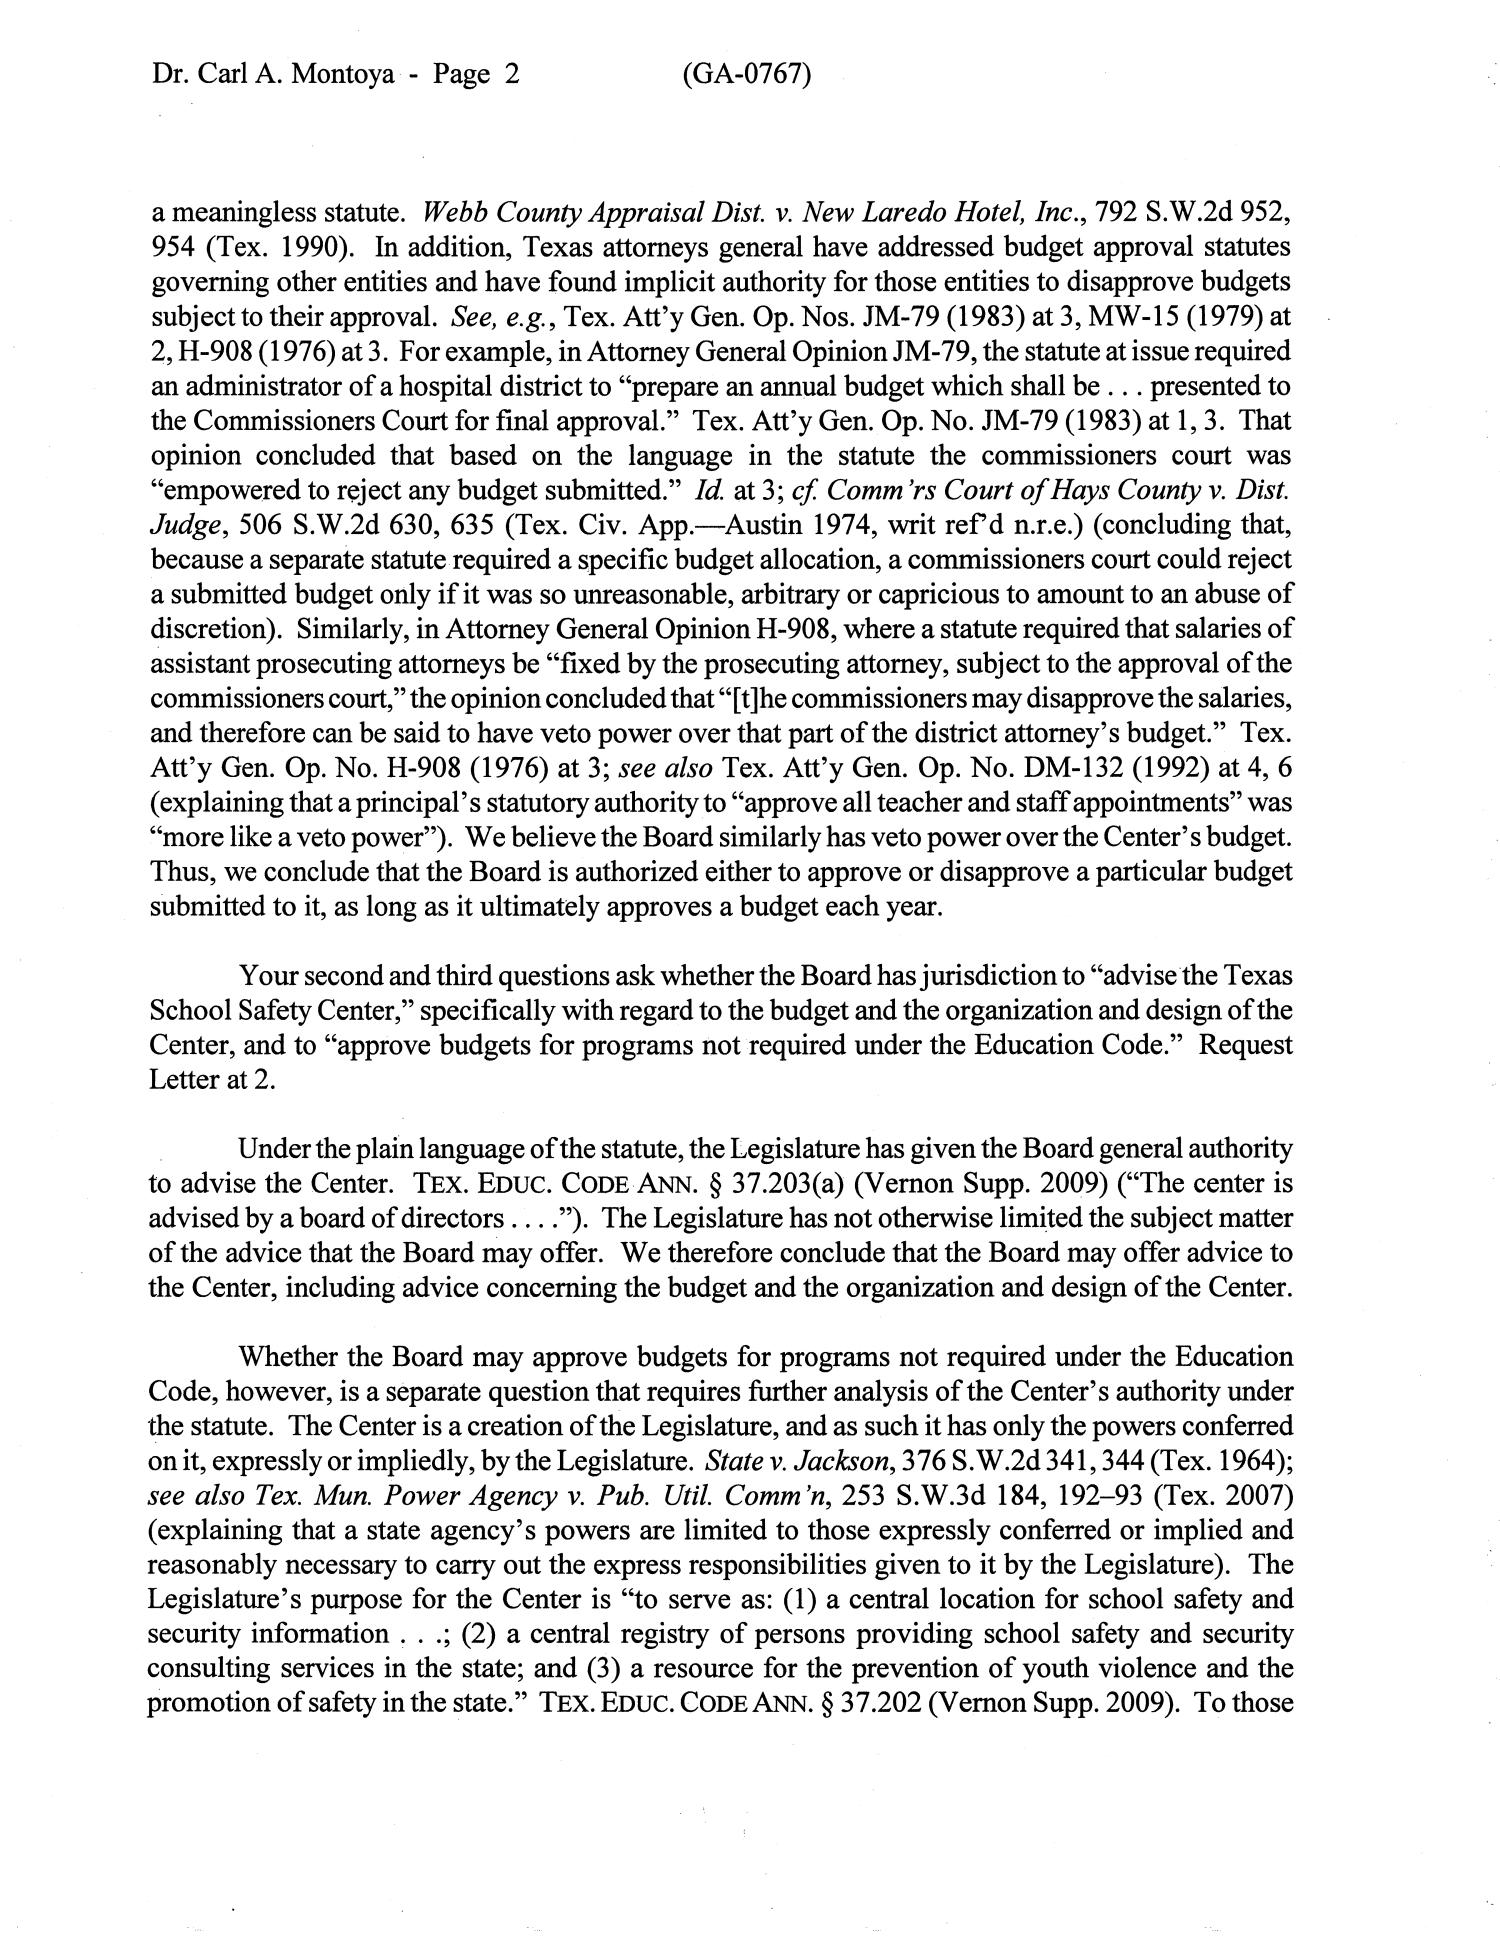 Texas Attorney General Opinion: GA-0767
                                                
                                                    [Sequence #]: 2 of 4
                                                